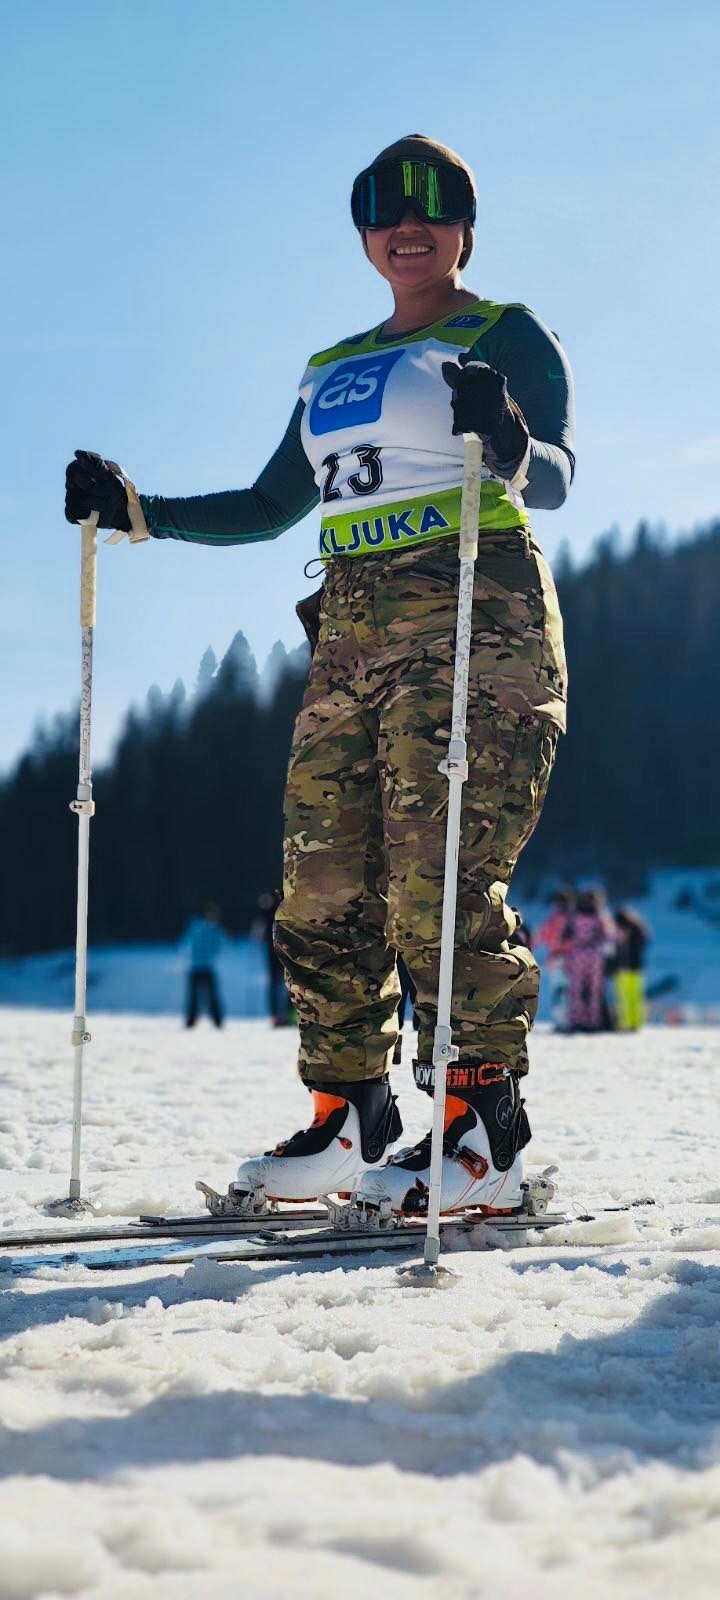 Colorado Airman pushes limits, places first in Slovenian biathlon